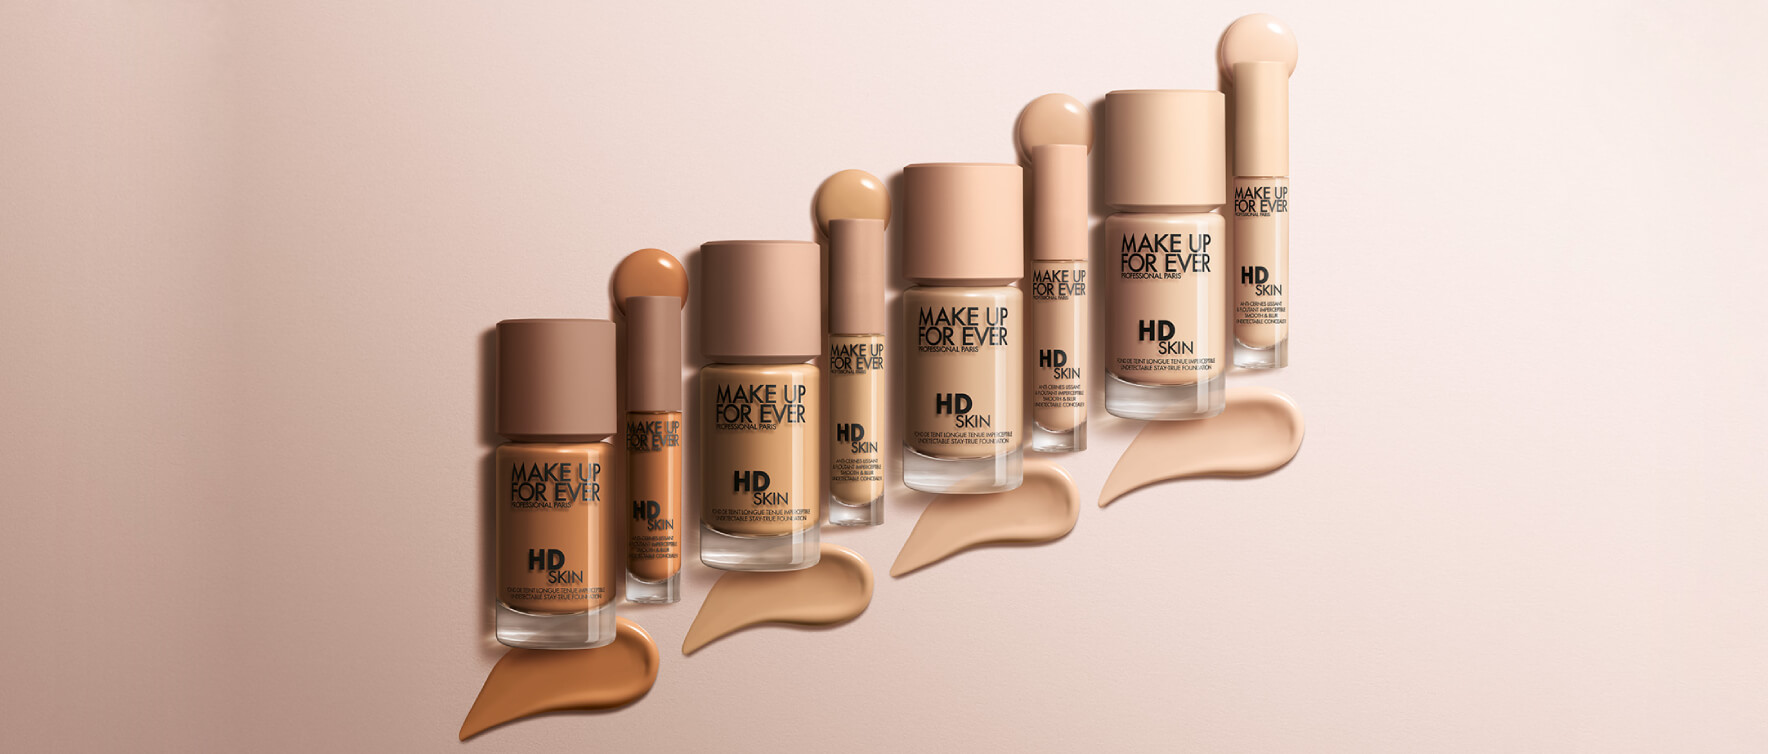 Make Up Forever review for the HD Skin liquid foundation